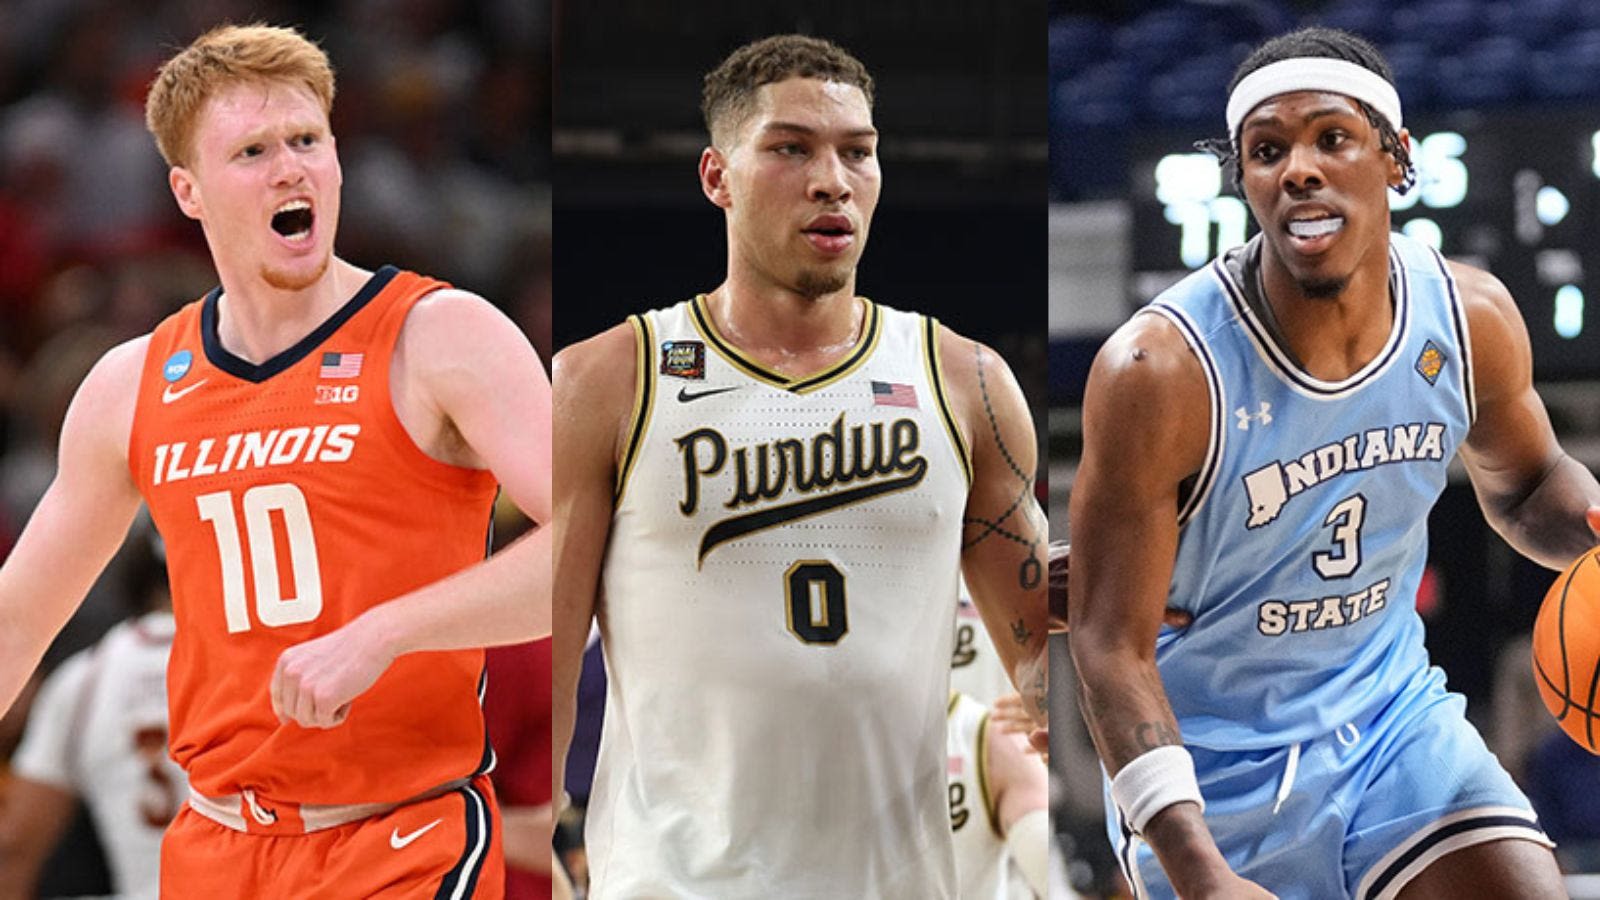 On the move: 25 most interesting college basketball transfers involving Indiana players